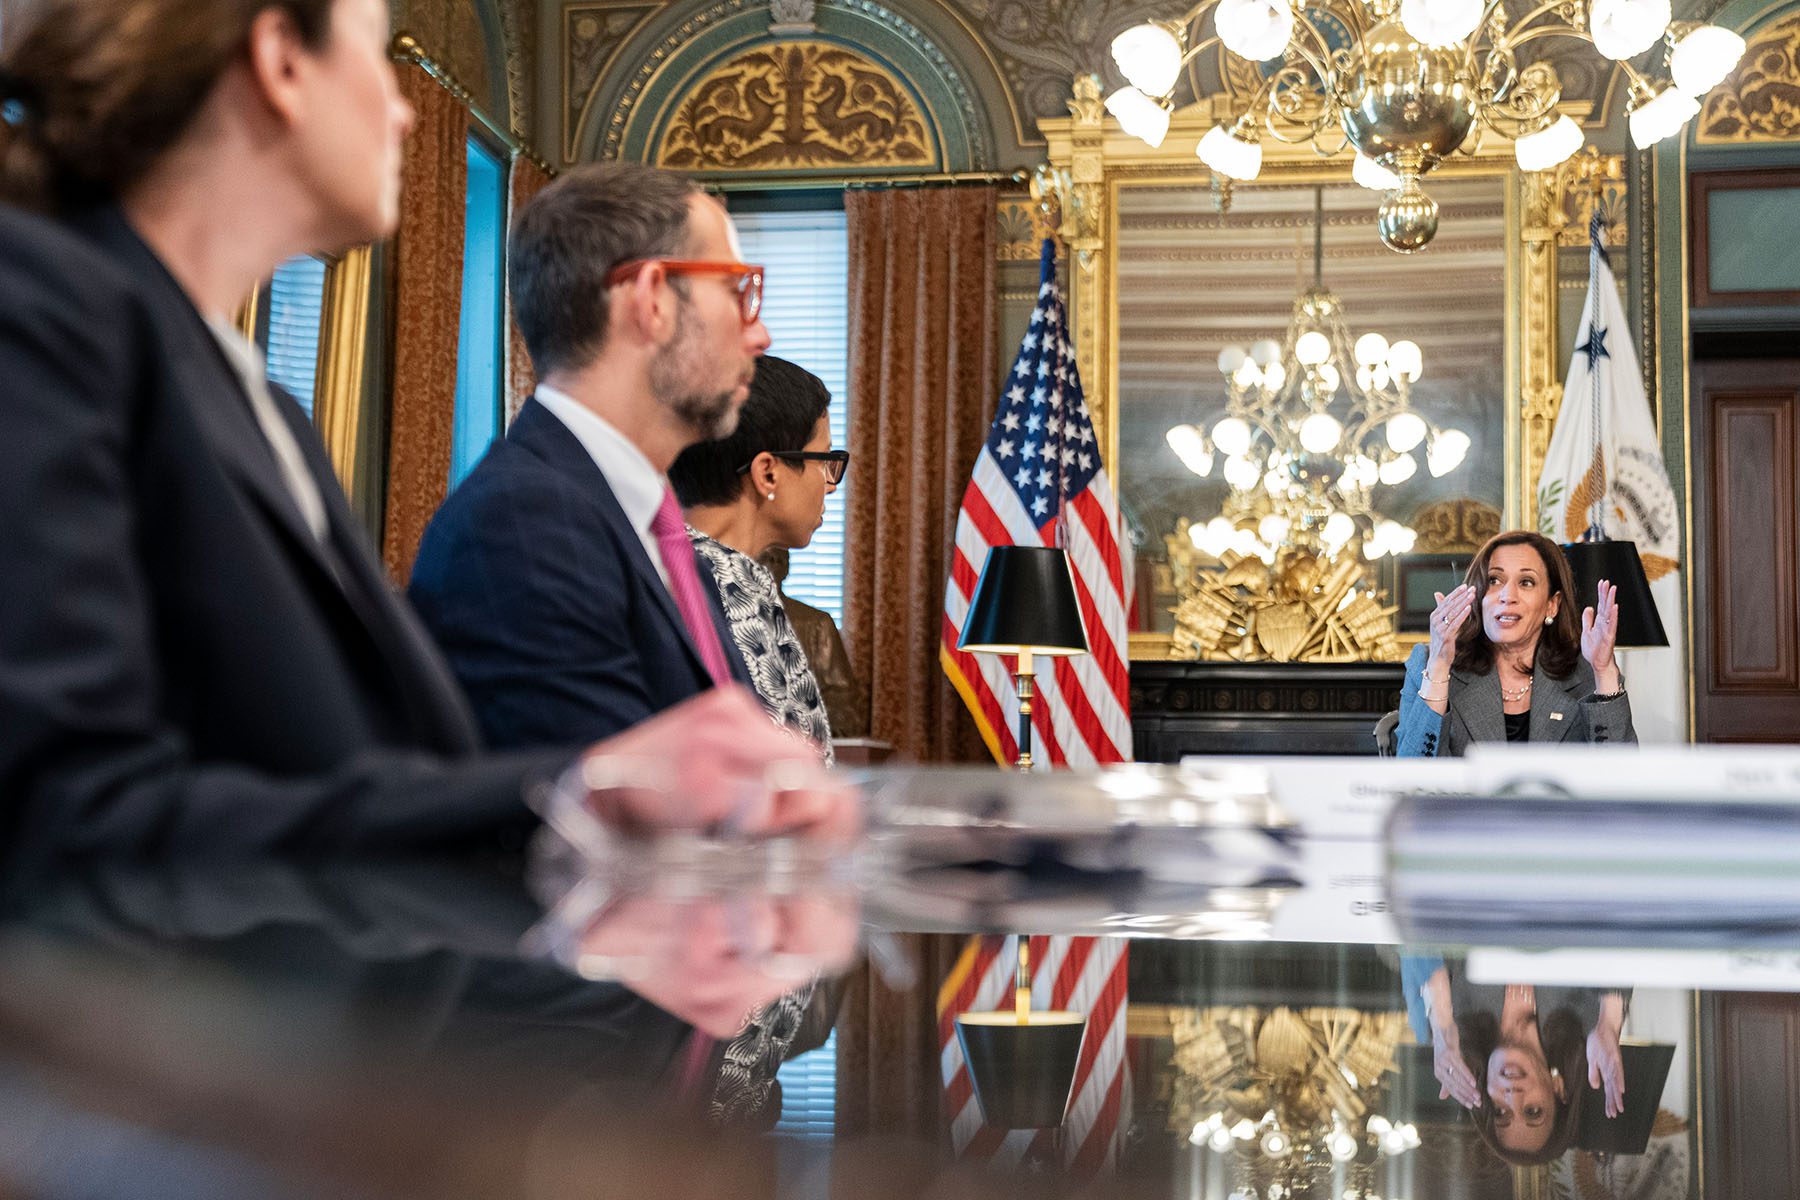 Vice President Harris speaks at a meeting in an ornate room of the White House complex.